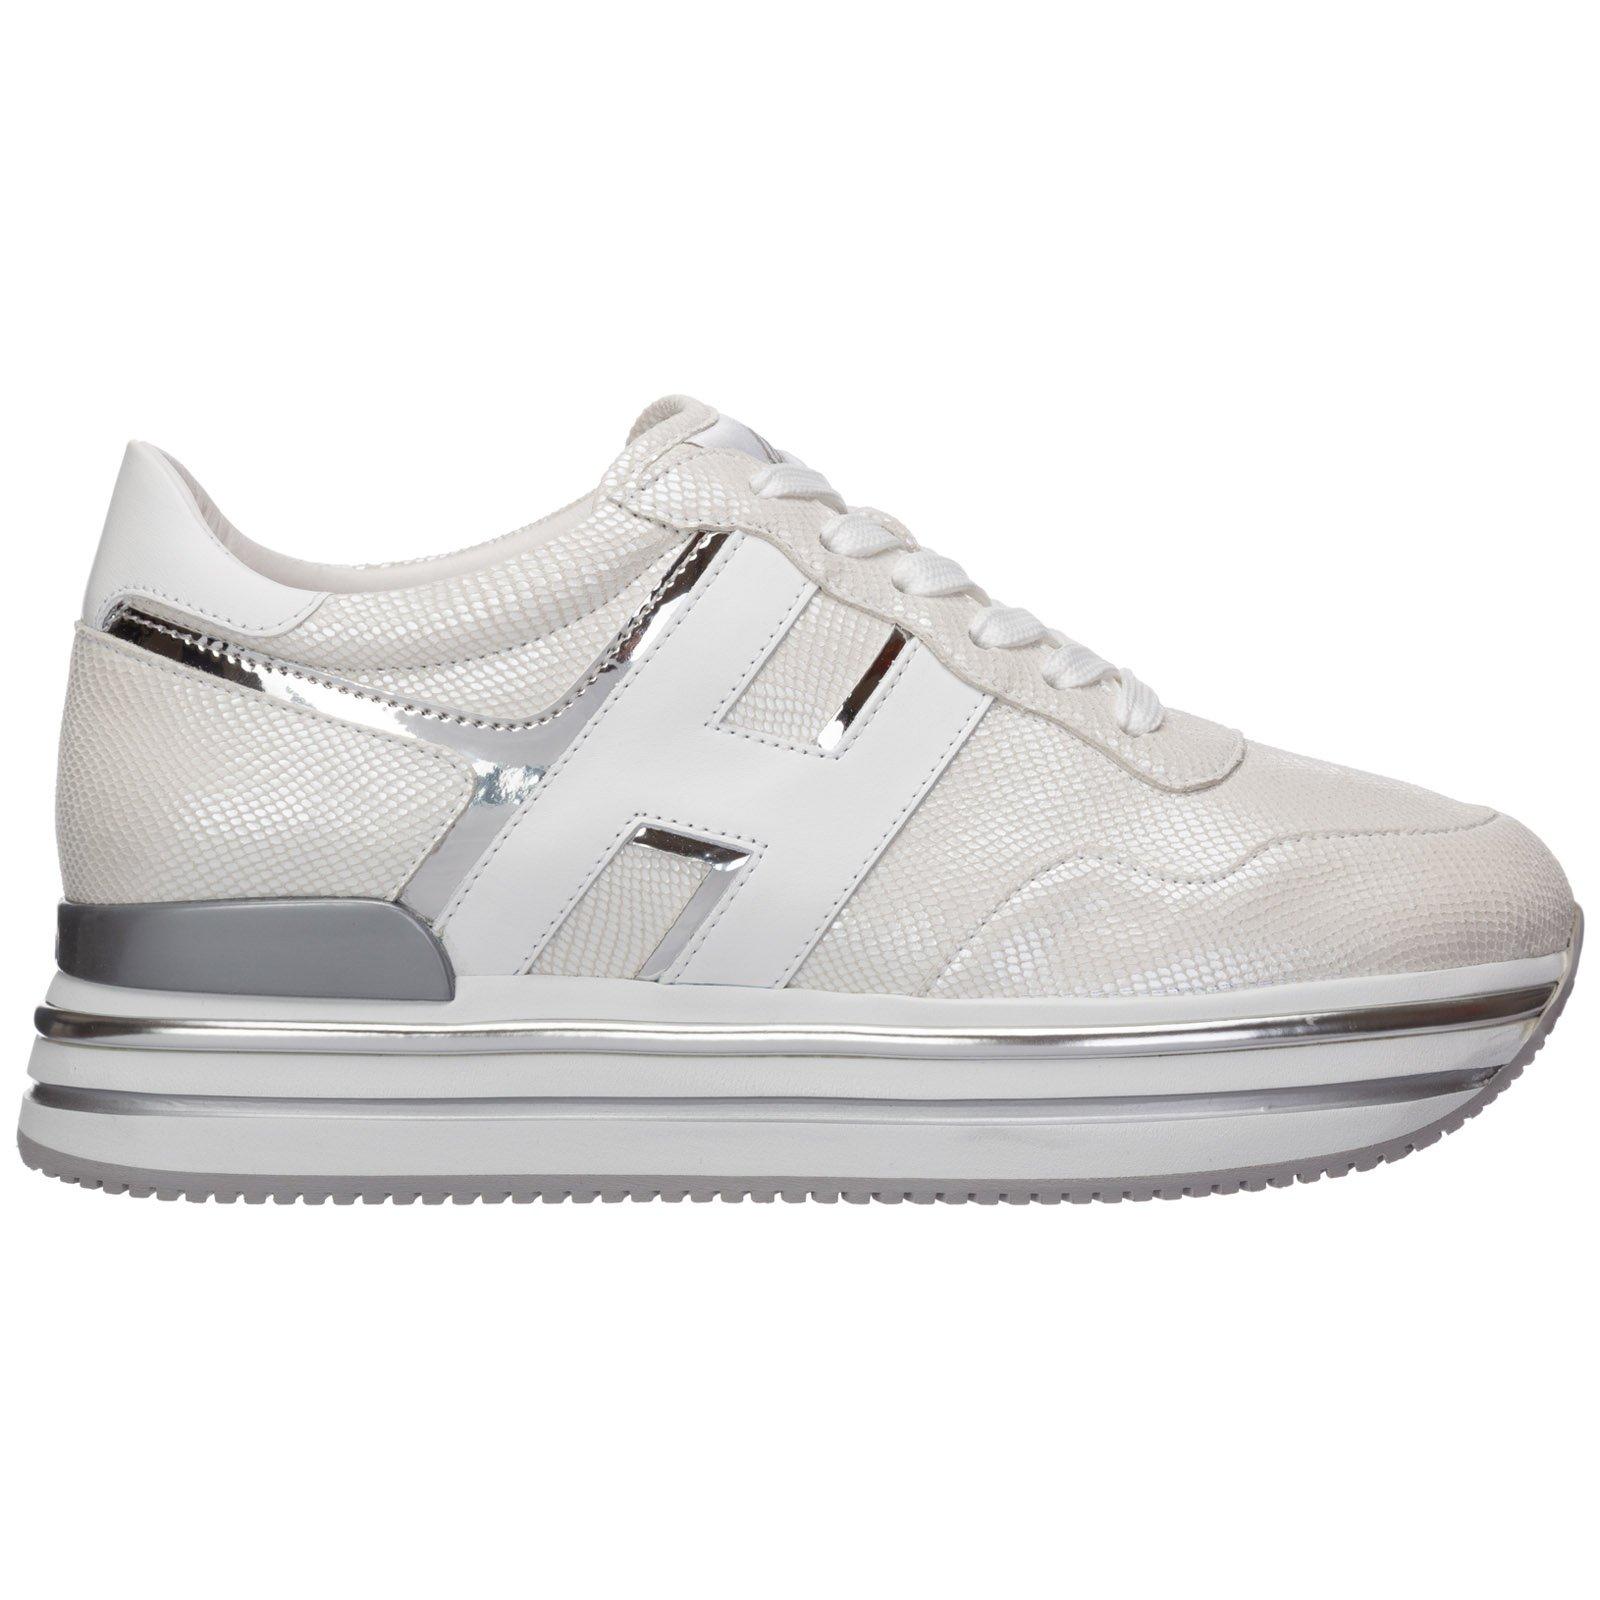 Hogan Leather Midi H222 Sneakers in White - Lyst